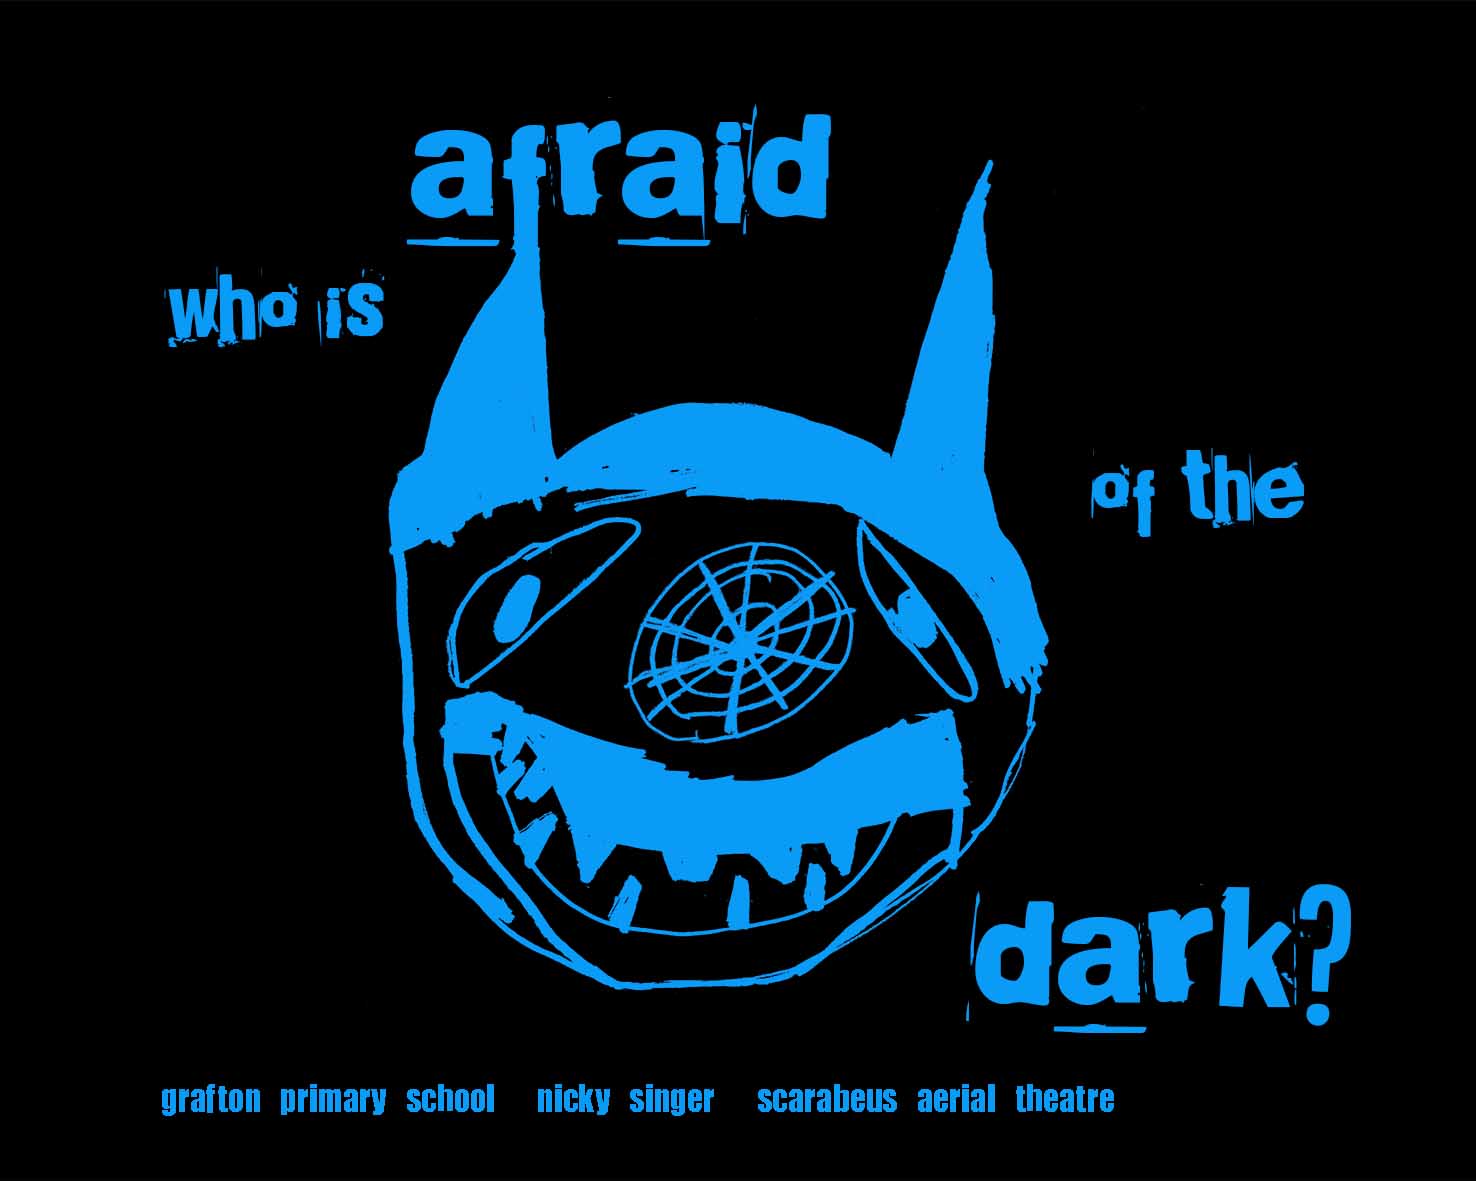 Whos Afraid of the Dark poster drawn by students from the project